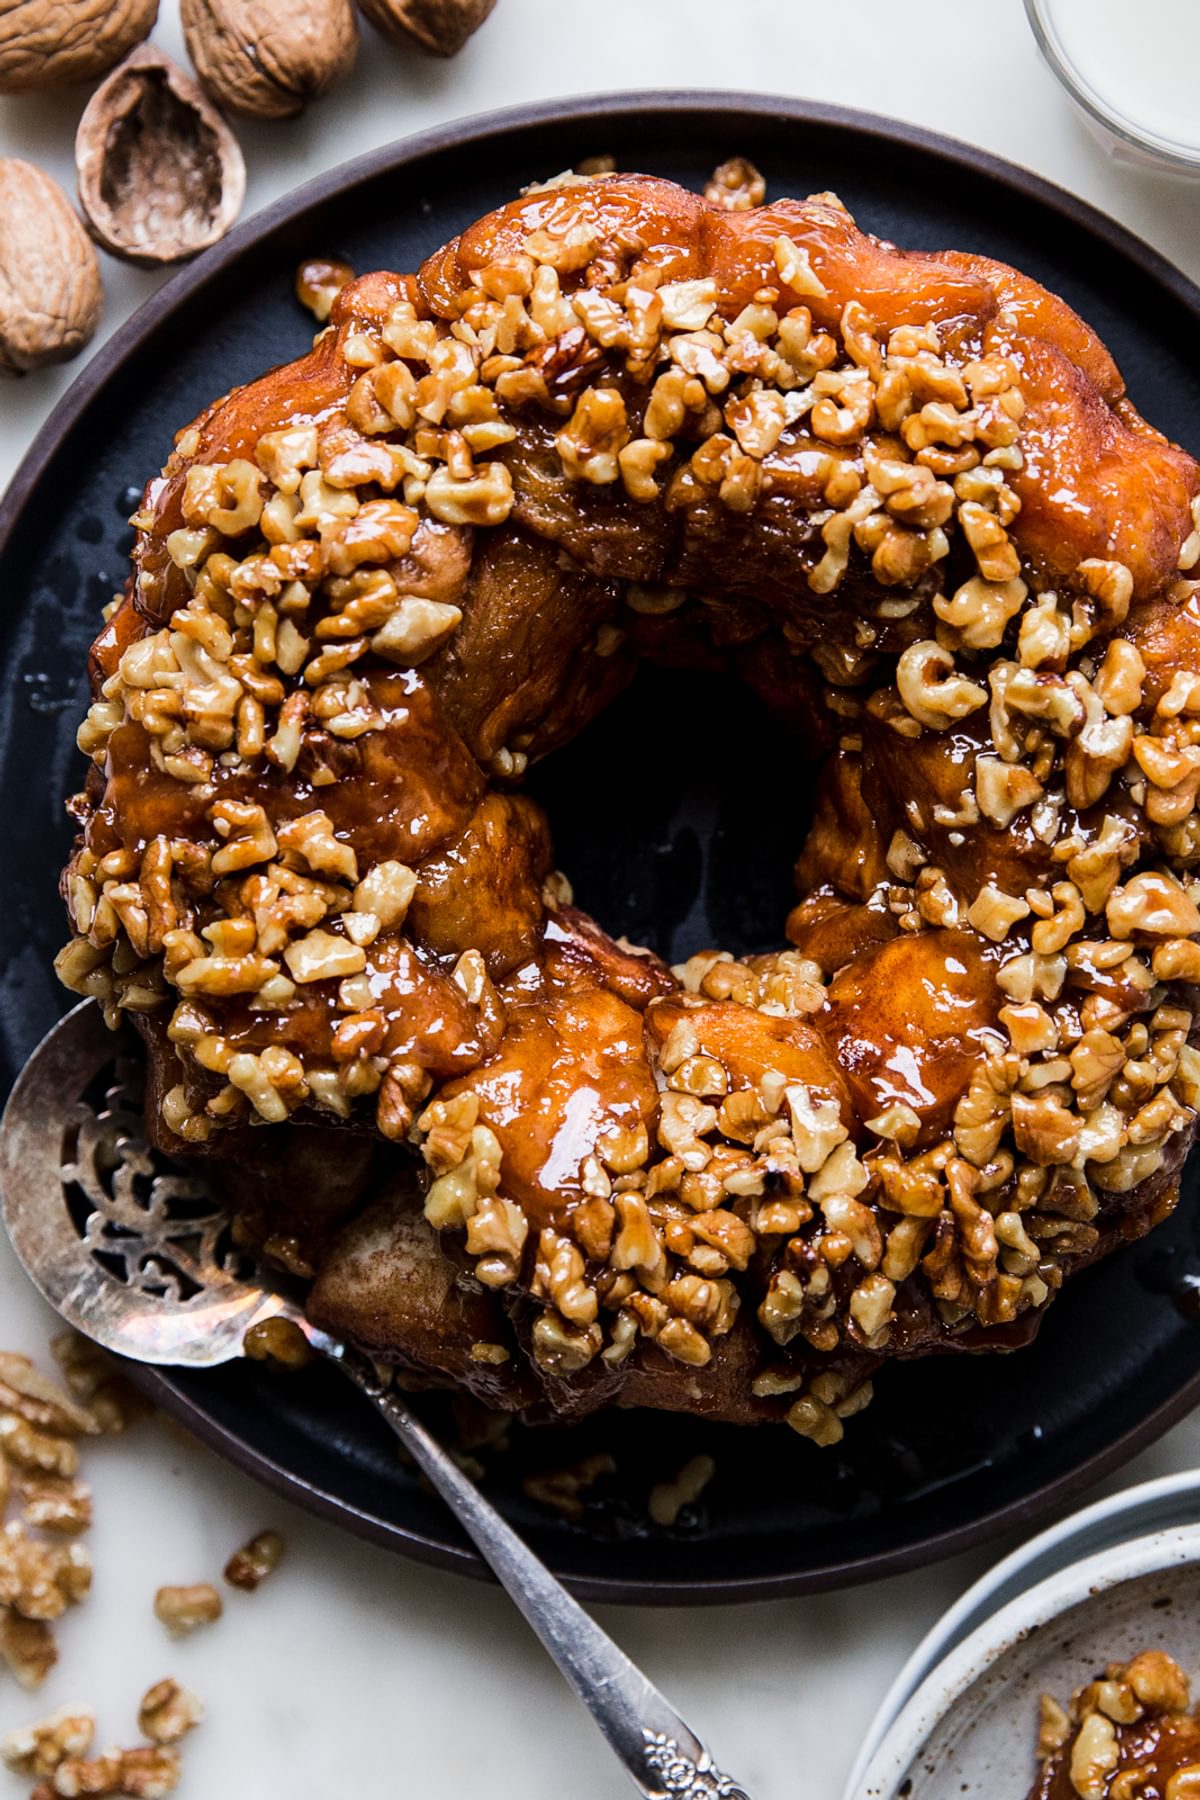 Monkey bread with walnuts and vanilla shown on a black platter with a silver serving spoon